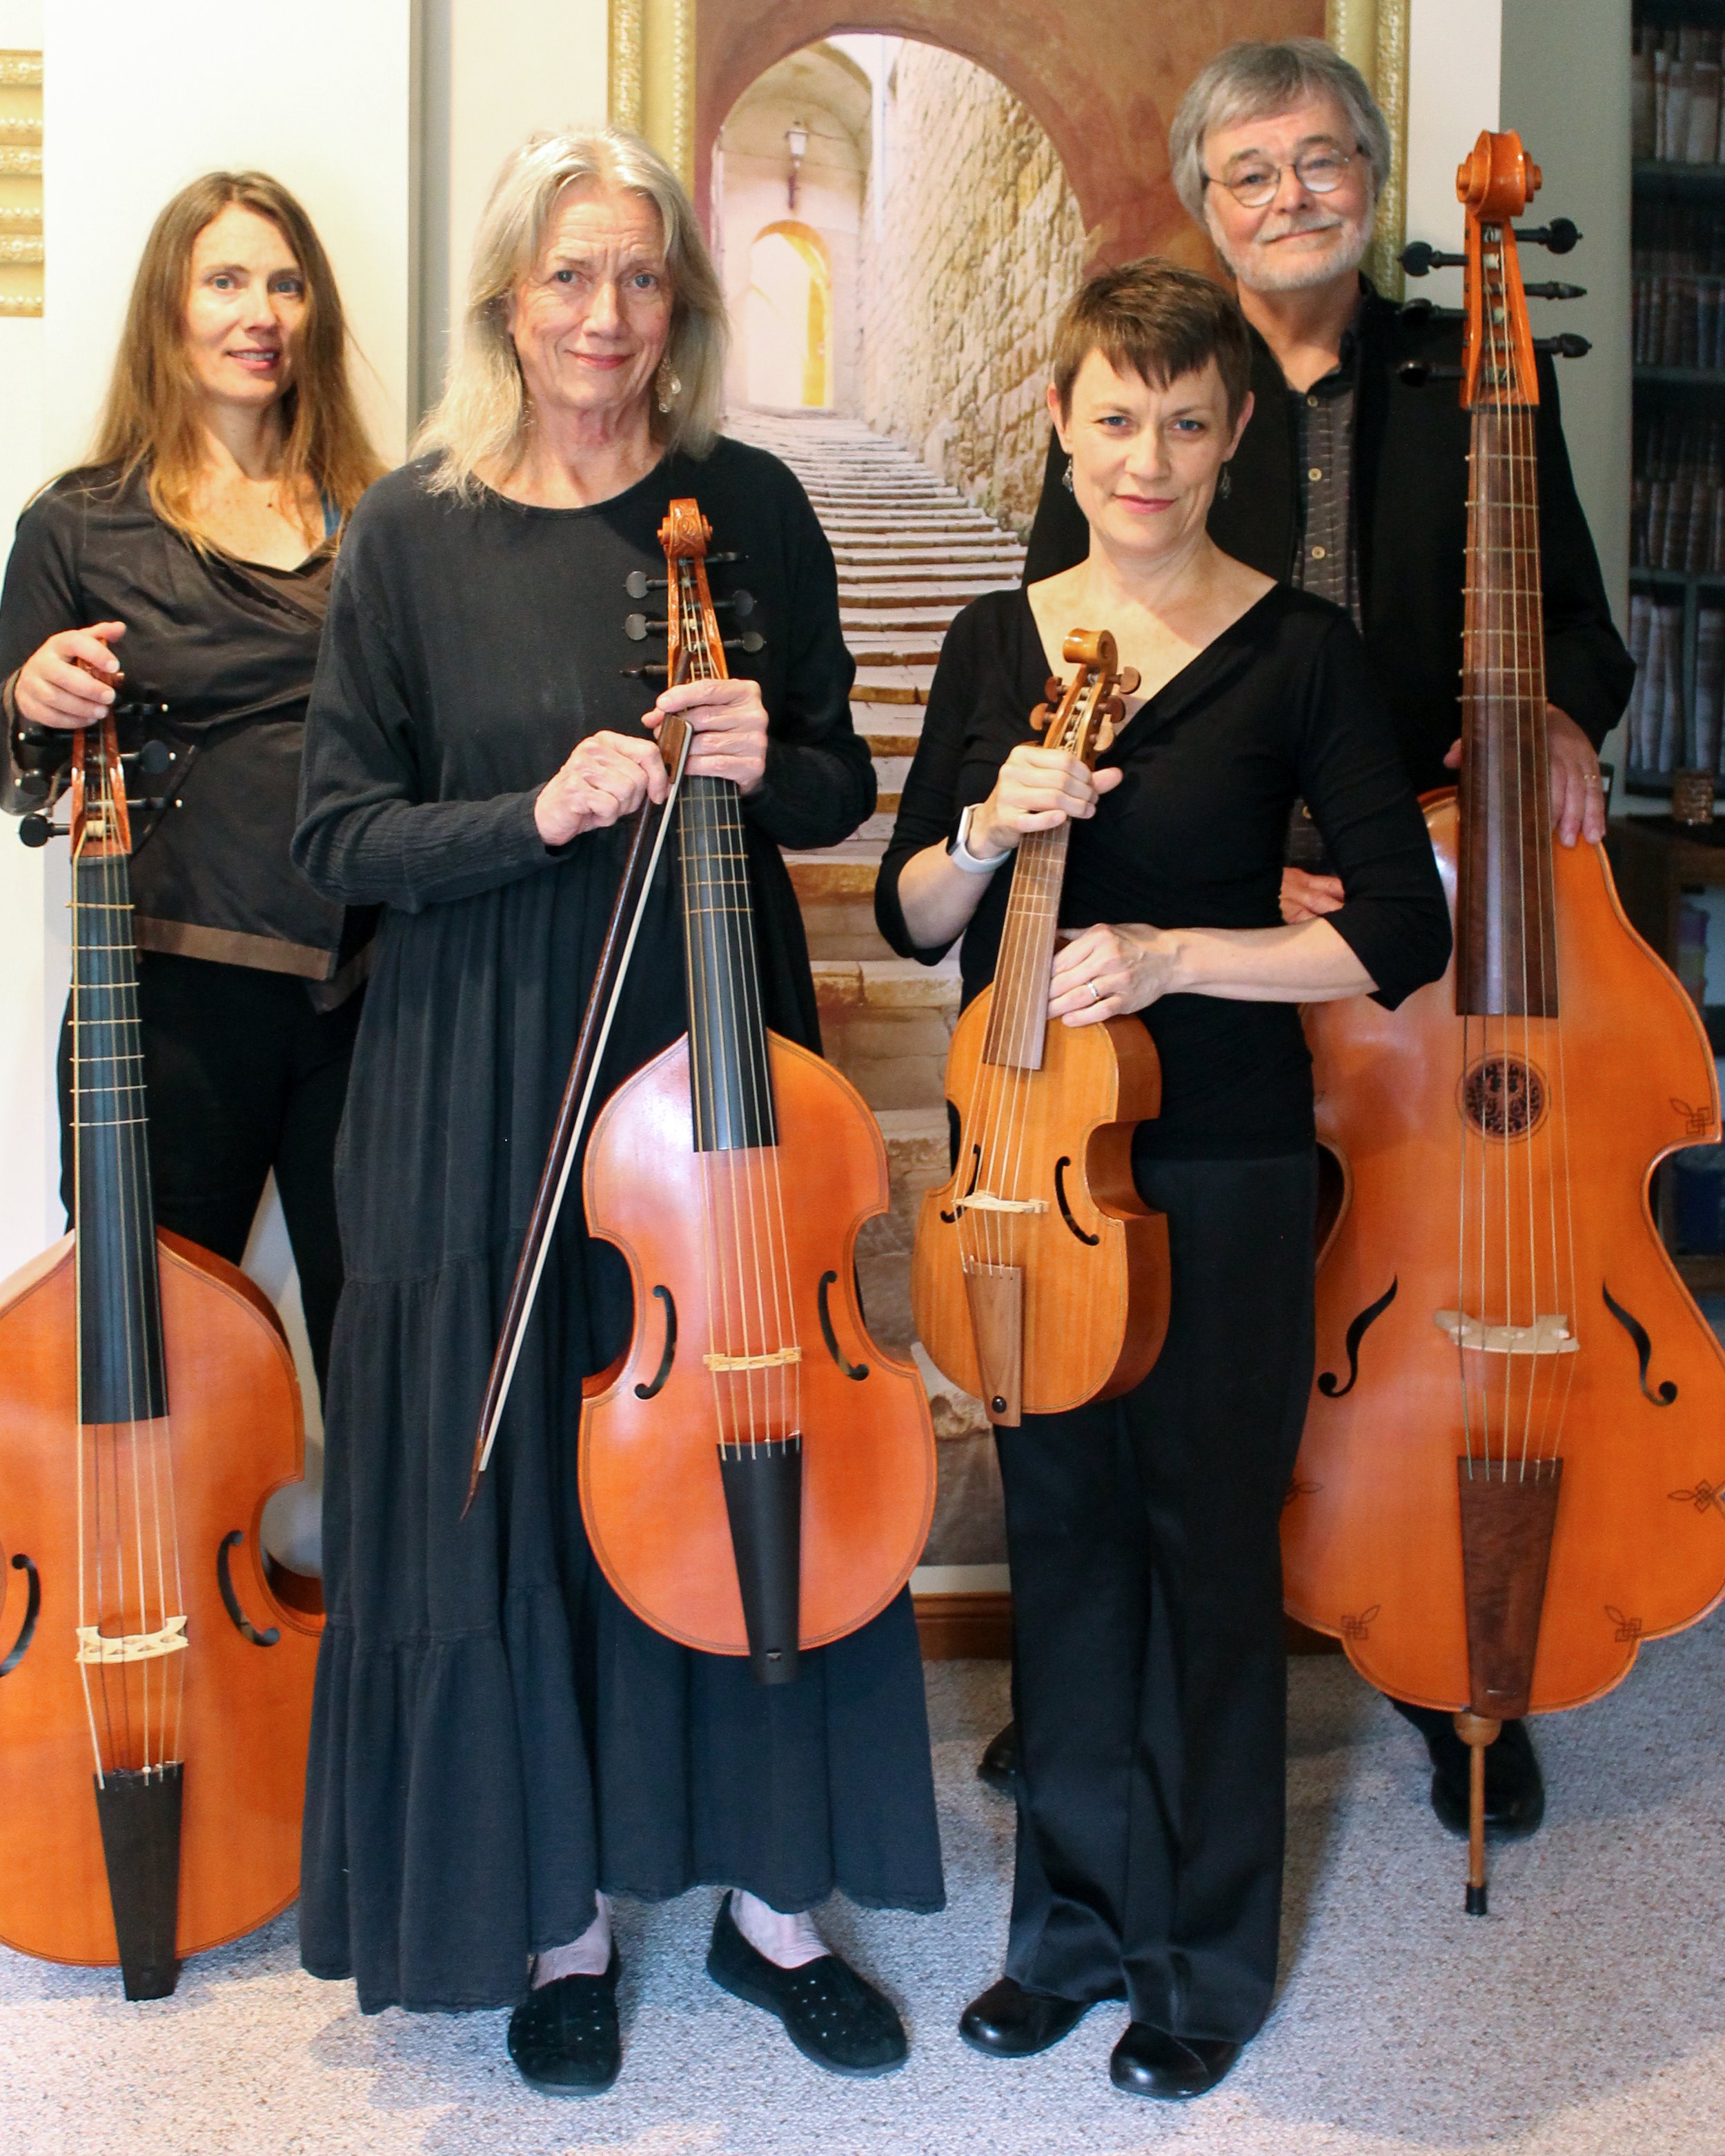    We are busy planning the 58th Indianapolis Early Music Festival: June - July, 2024! In the meantime, please take note of our updated contact information:      Indianapolis Early Music 4011 N Pennsylvania St Indianapolis, IN 46205 (317) 840-4272   